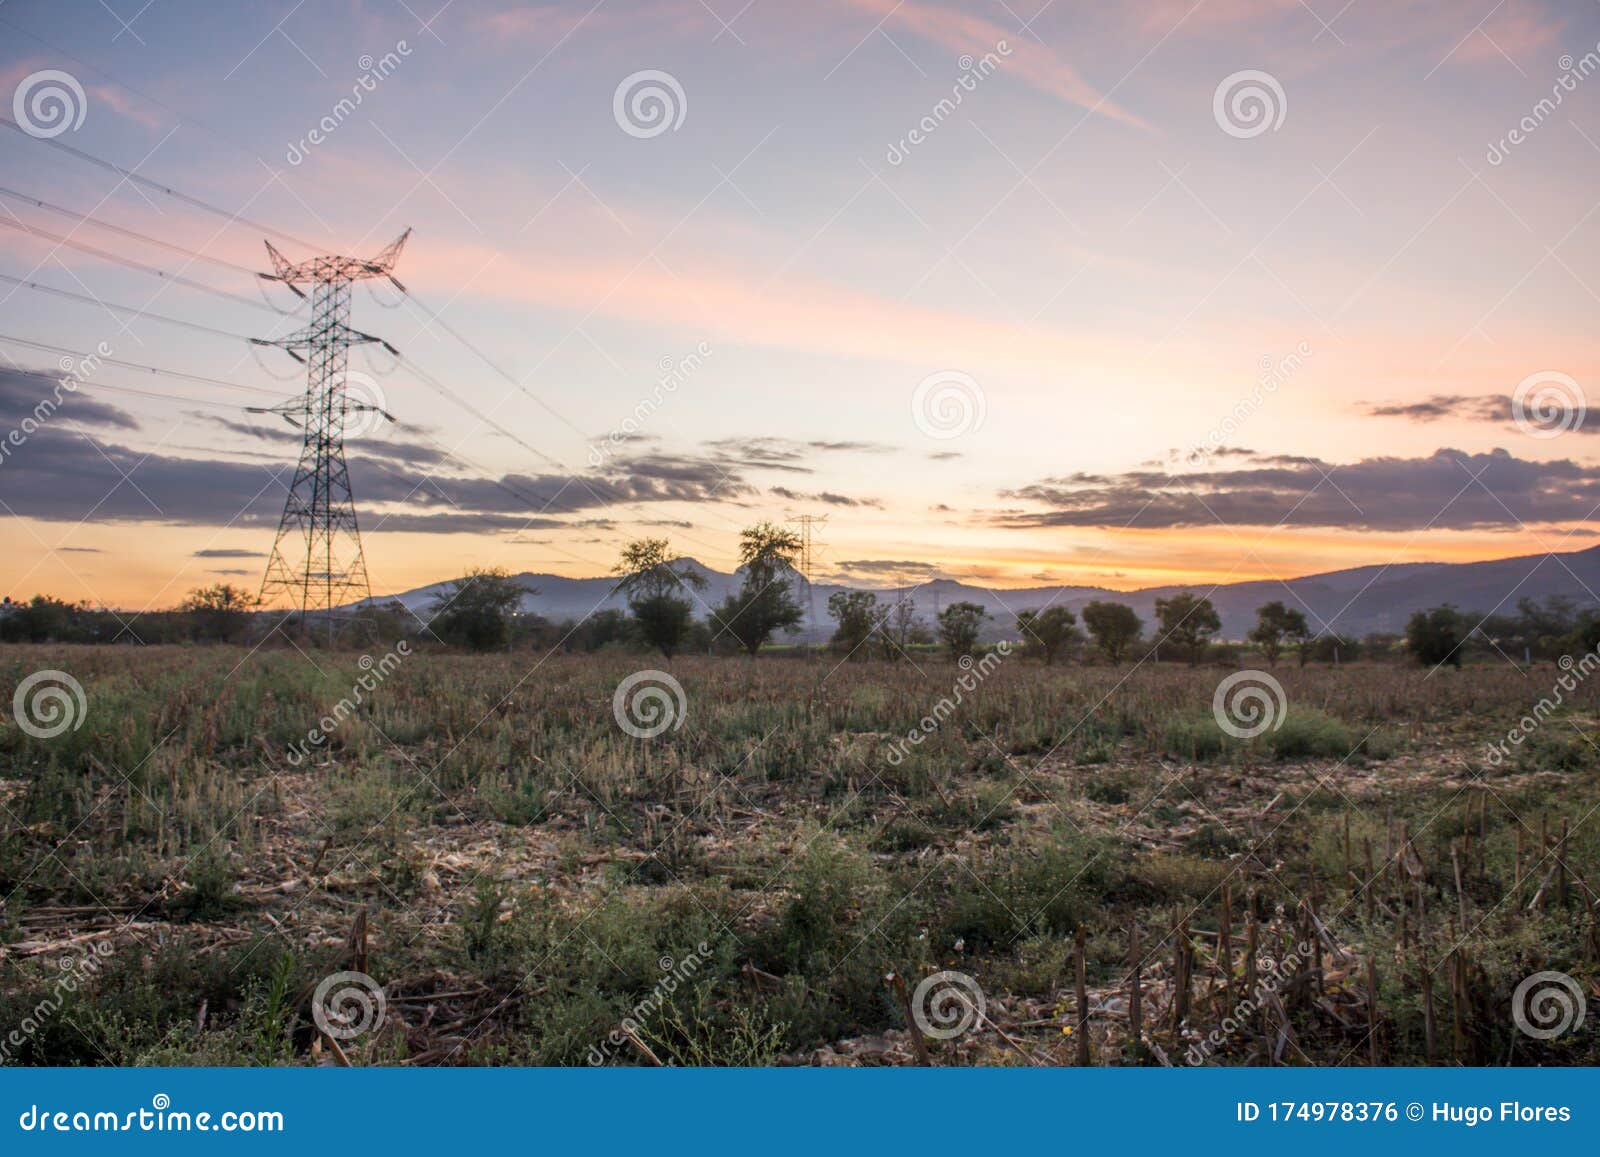 electrical tower and cables in a field at sunset